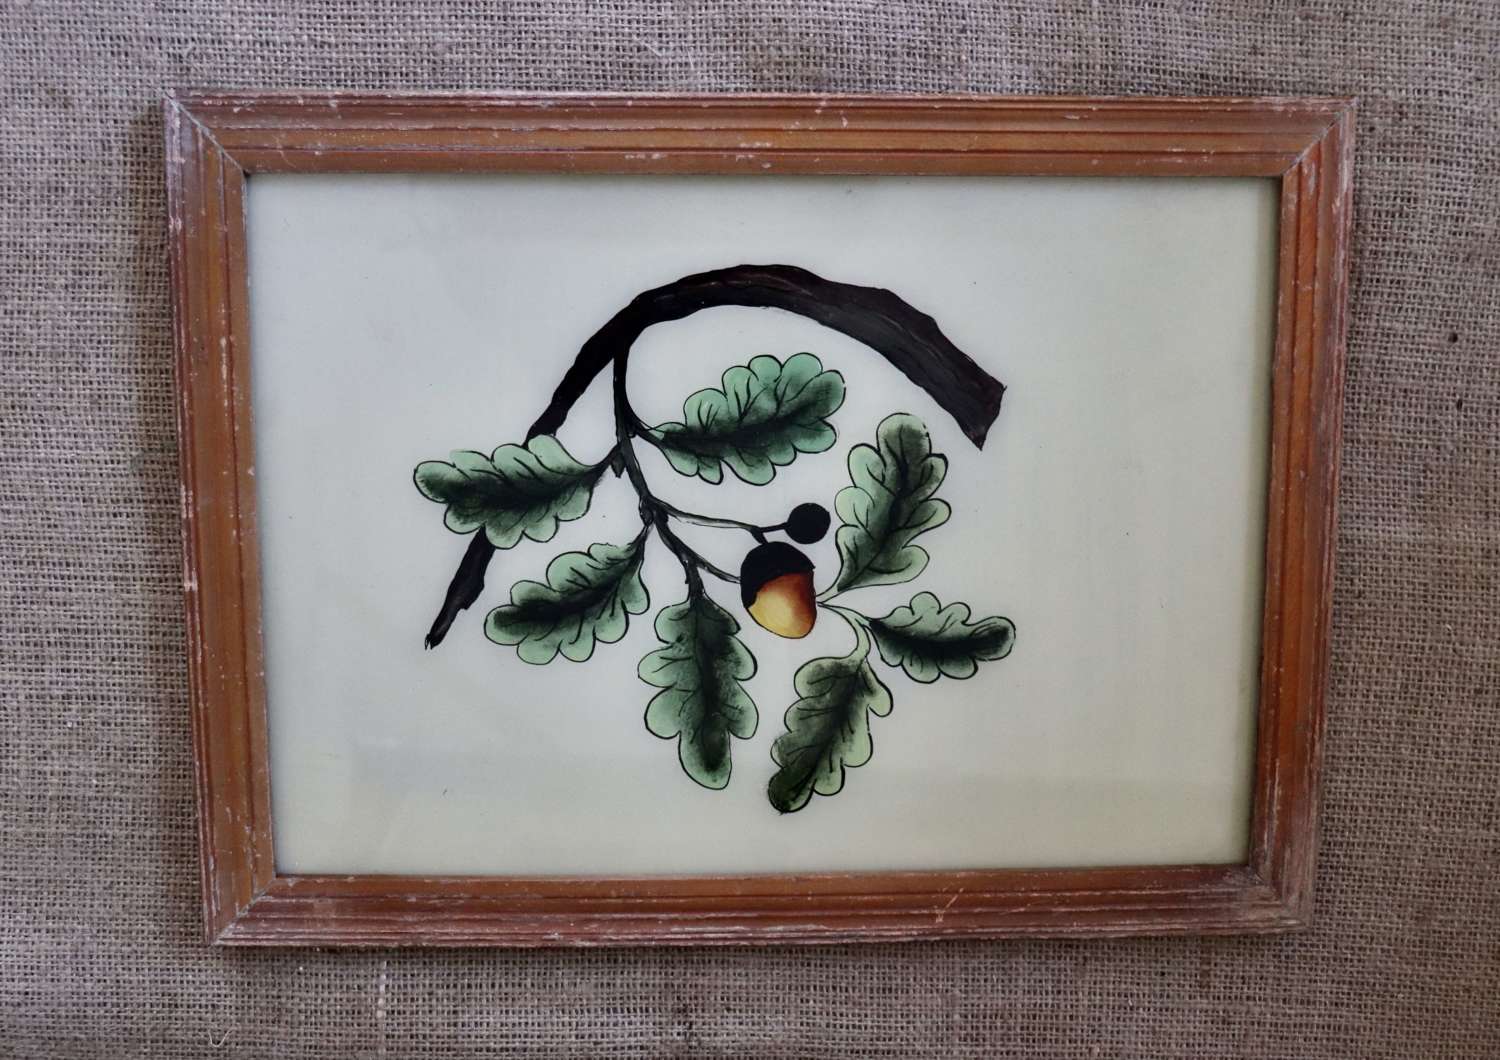 Indian reverse glass painting of an oak leaf